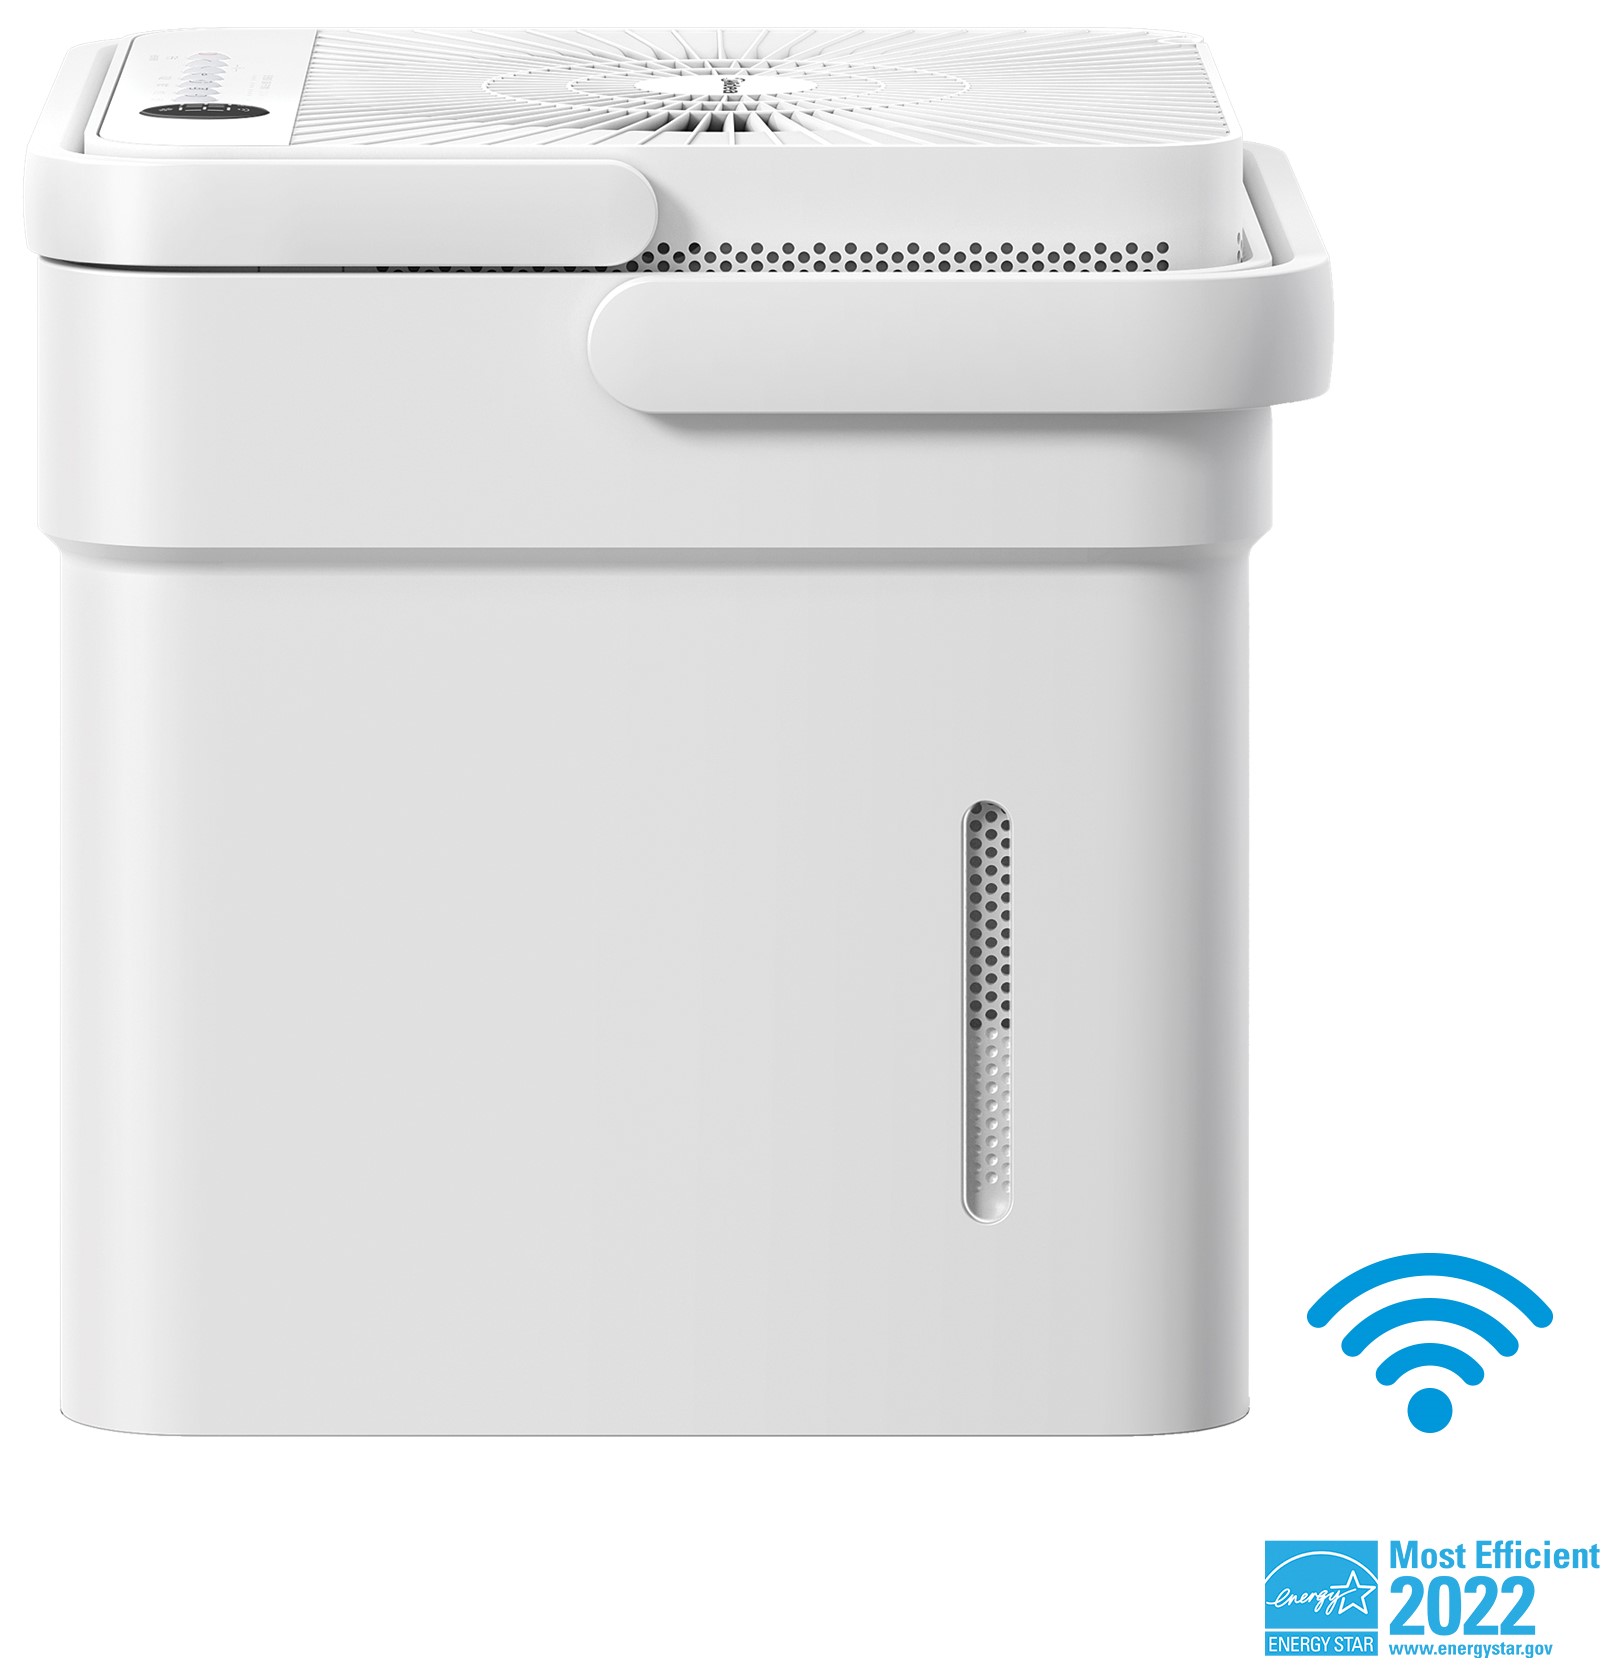 Midea Cube 20-Pint Smart Wifi Dehumidifier, Coverage up to 2,000 sq. ft., MAD20S1QWT - image 1 of 15